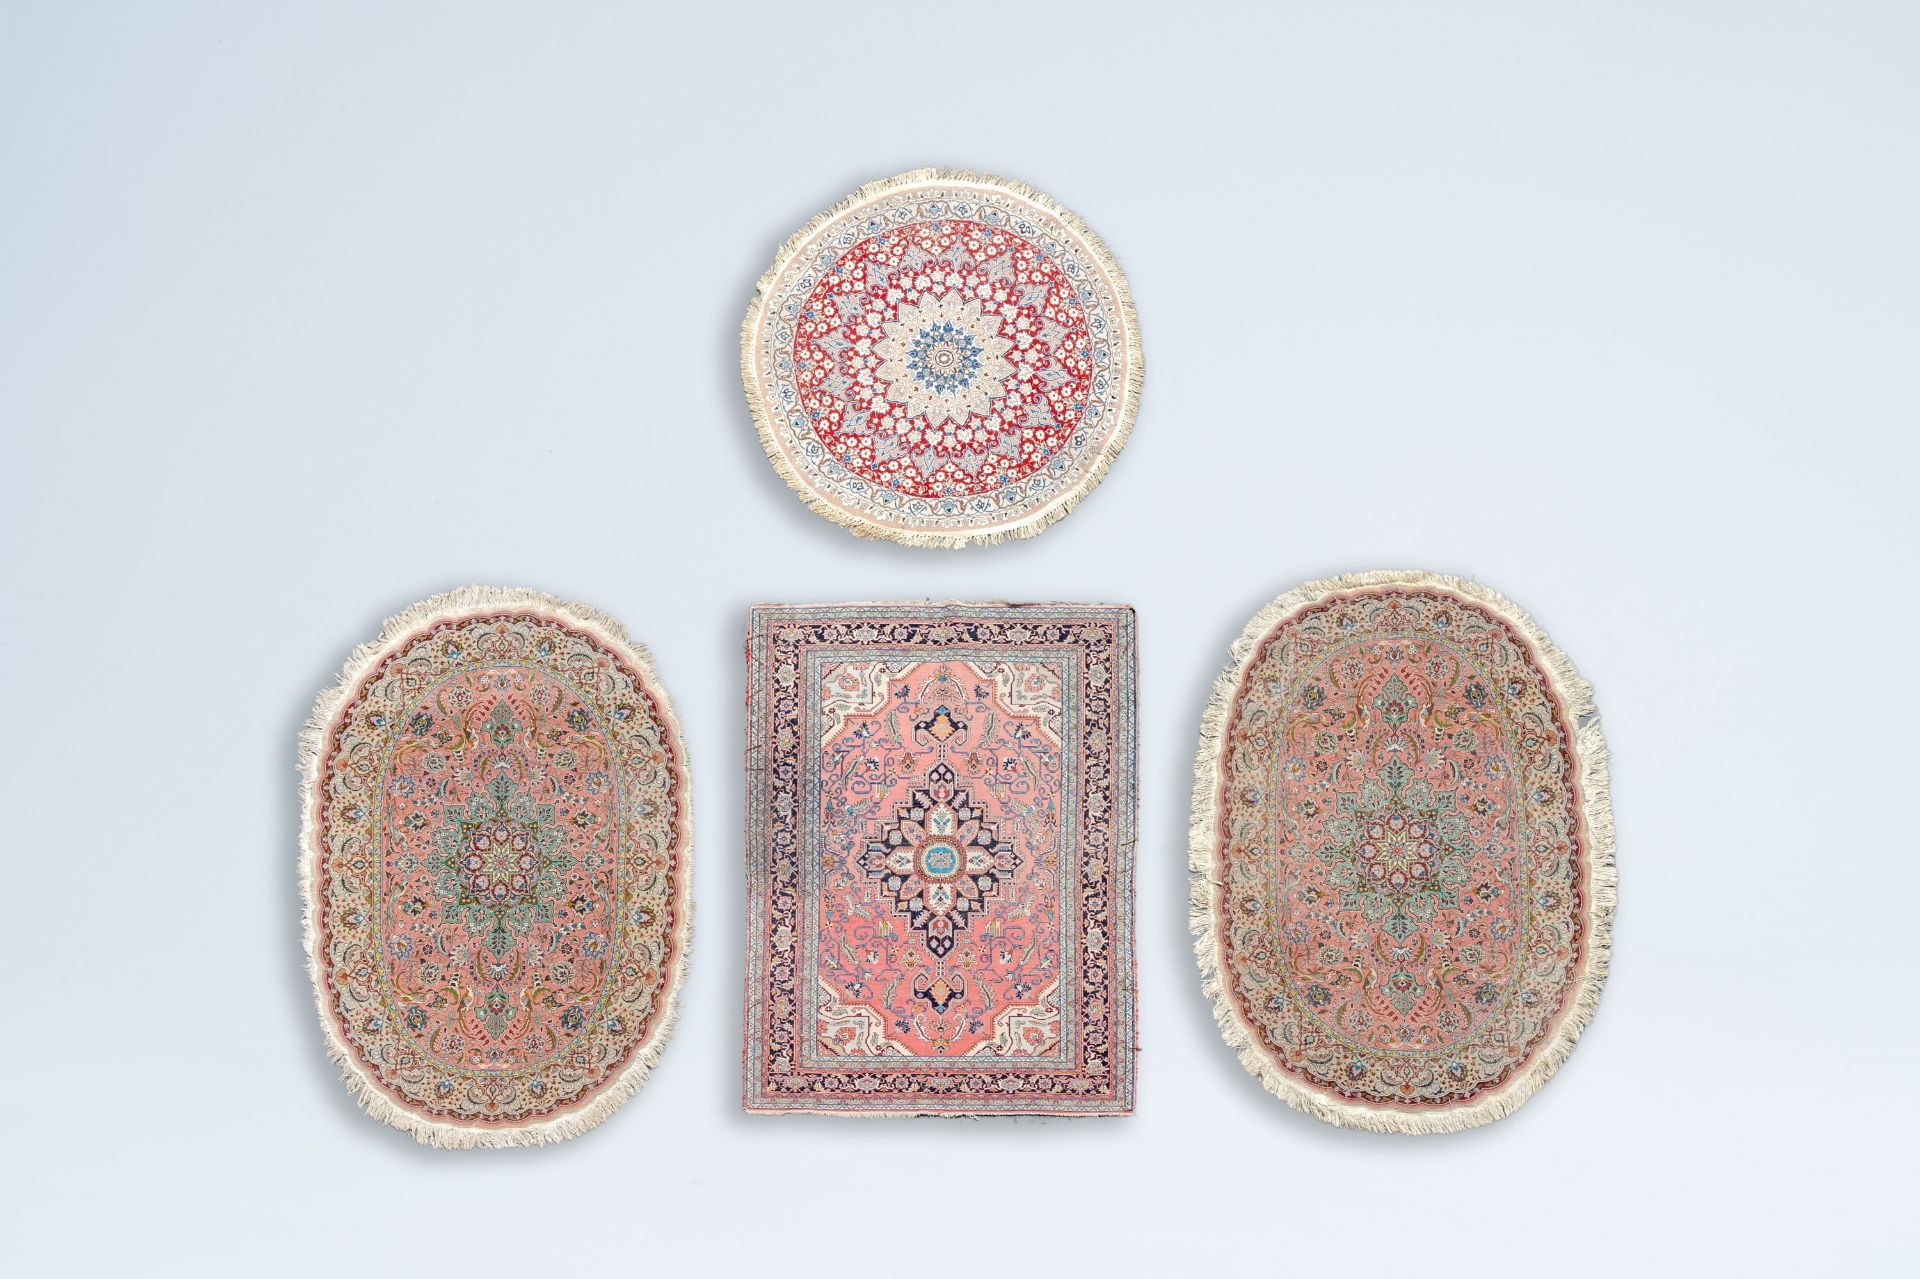 Four various Oriental rugs with floral design, wool on cotton, 20th C. - Image 2 of 6